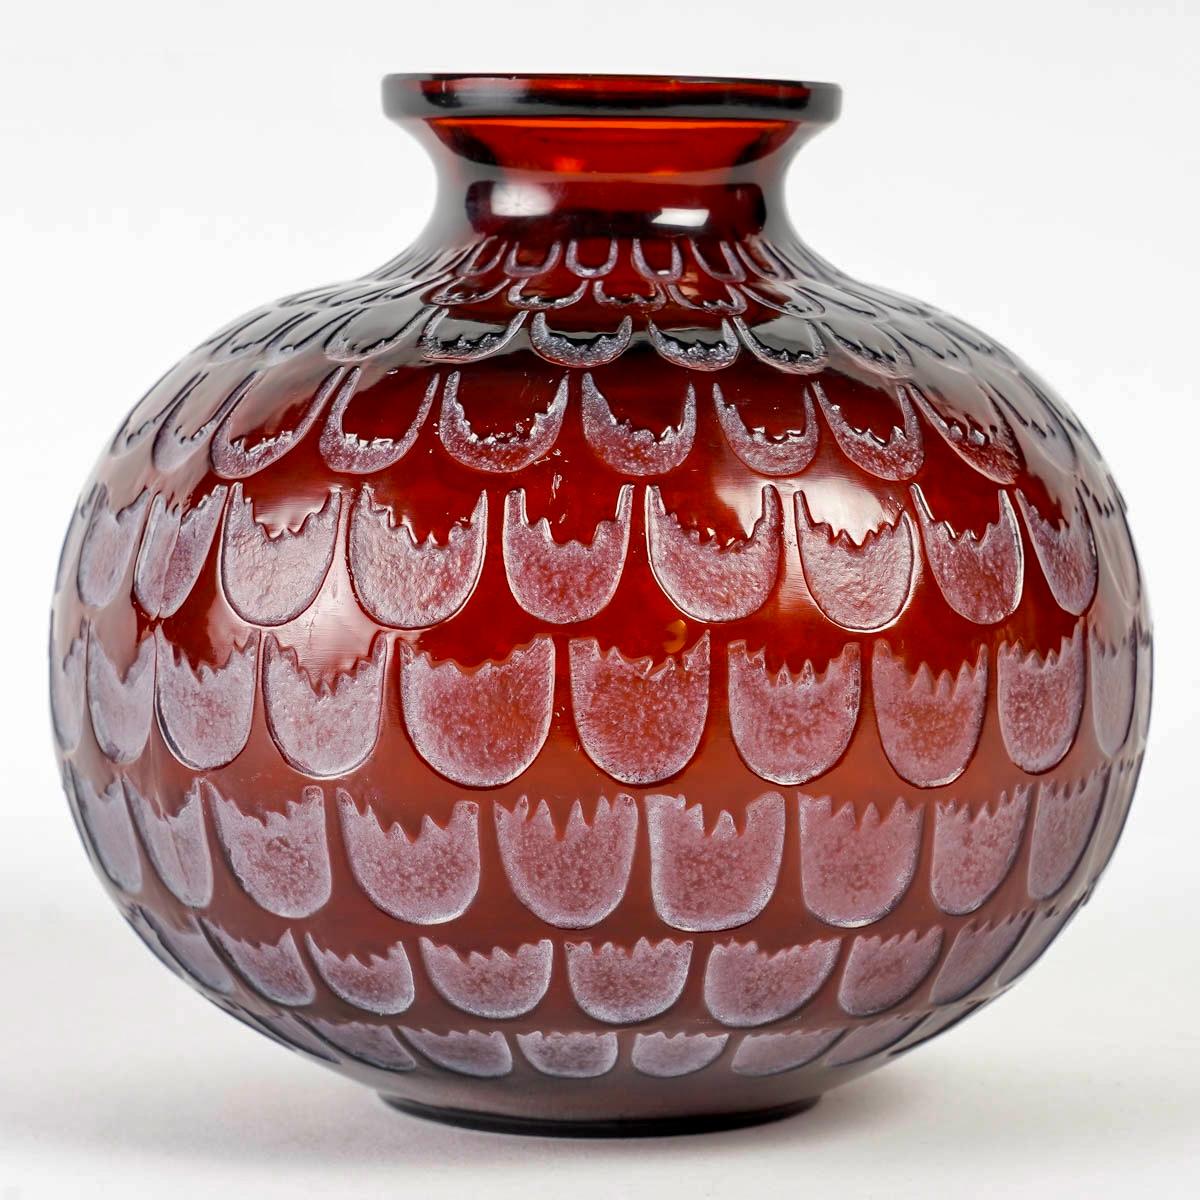 Art Deco 1930 Rene Lalique Vase Grenade Red Amber Glass with White Patina For Sale